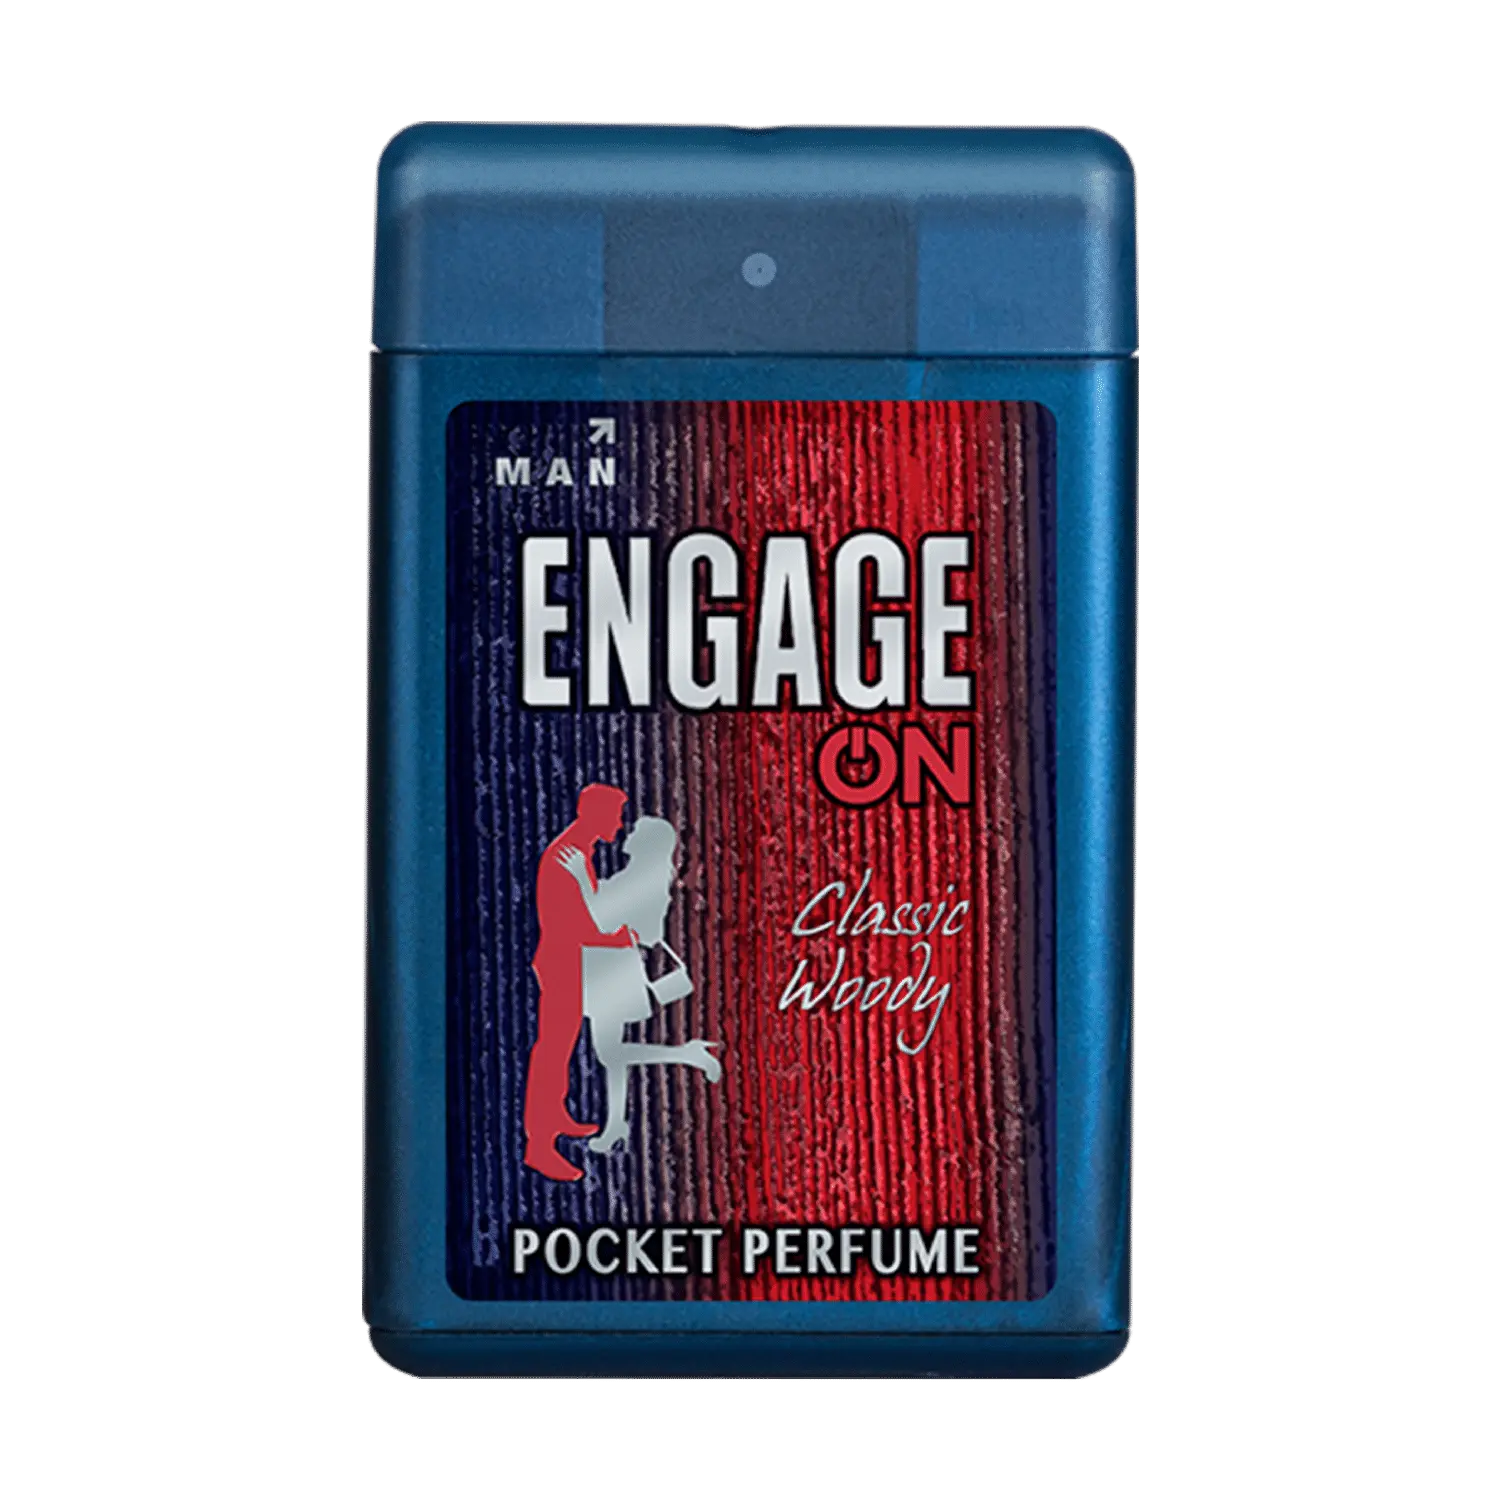 Engage ON Pocket Perfume for man Assorted Pack, Skin Friendly, 17 ml)